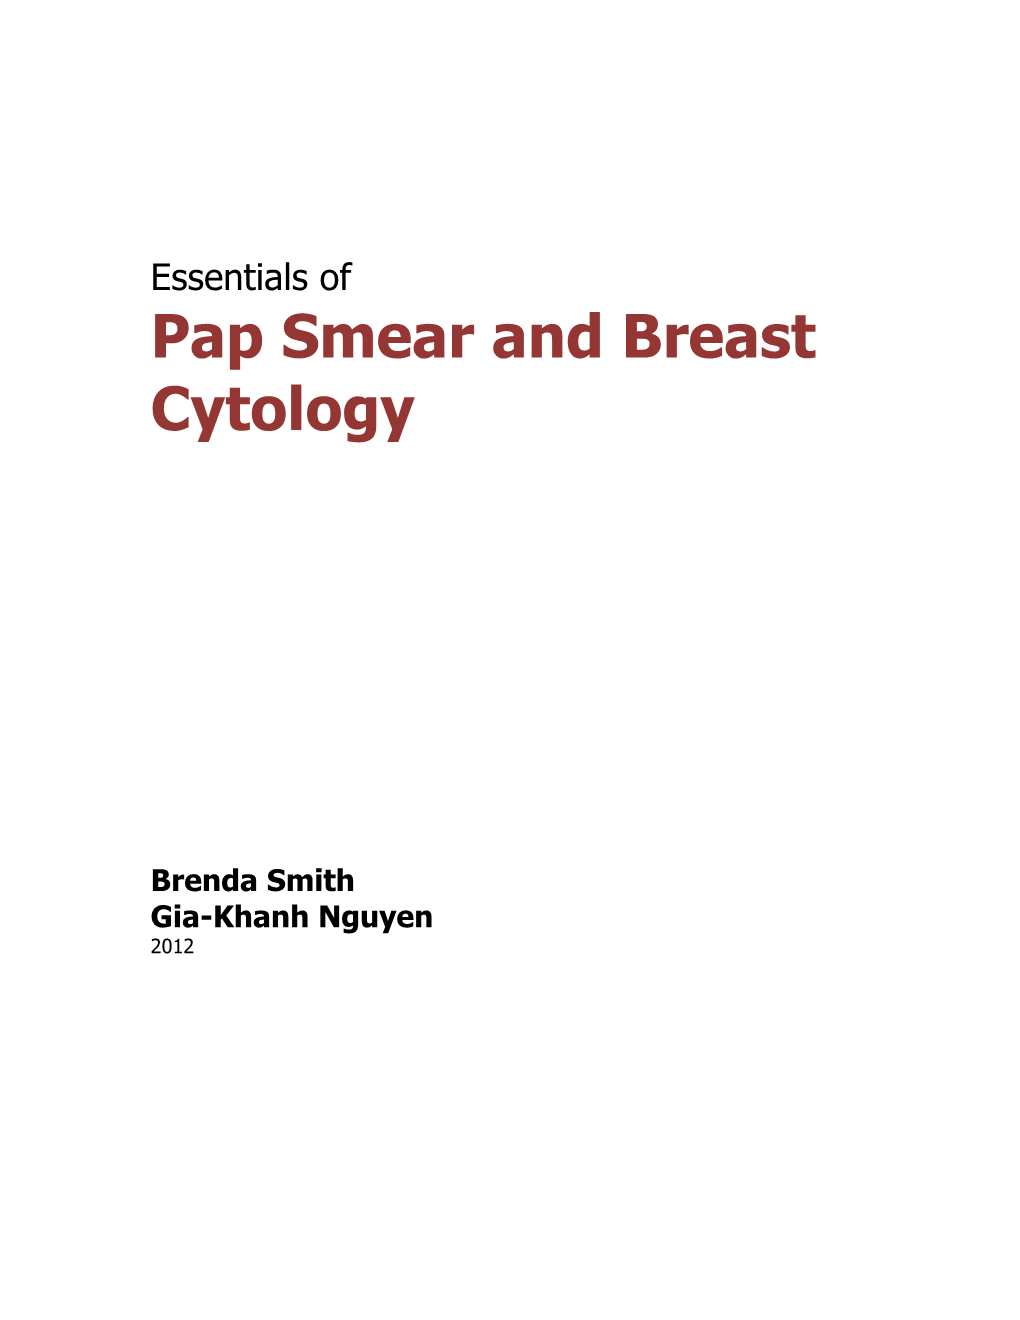 Essentials of Pap Smear and Breast Cytology